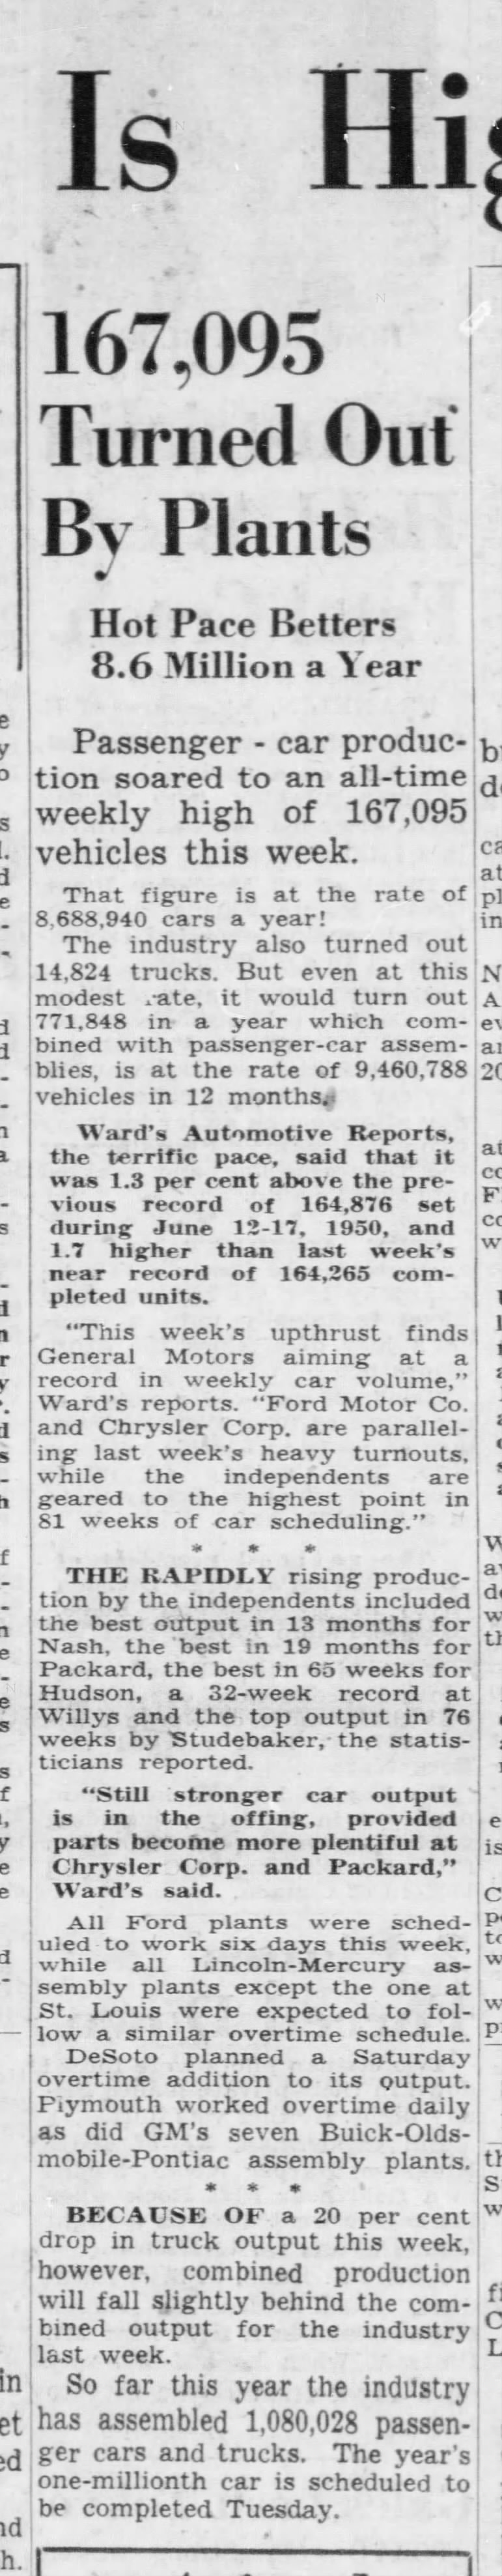 Week's Auto Output Is Highest Ever: 167,095 Turned Out By Plants